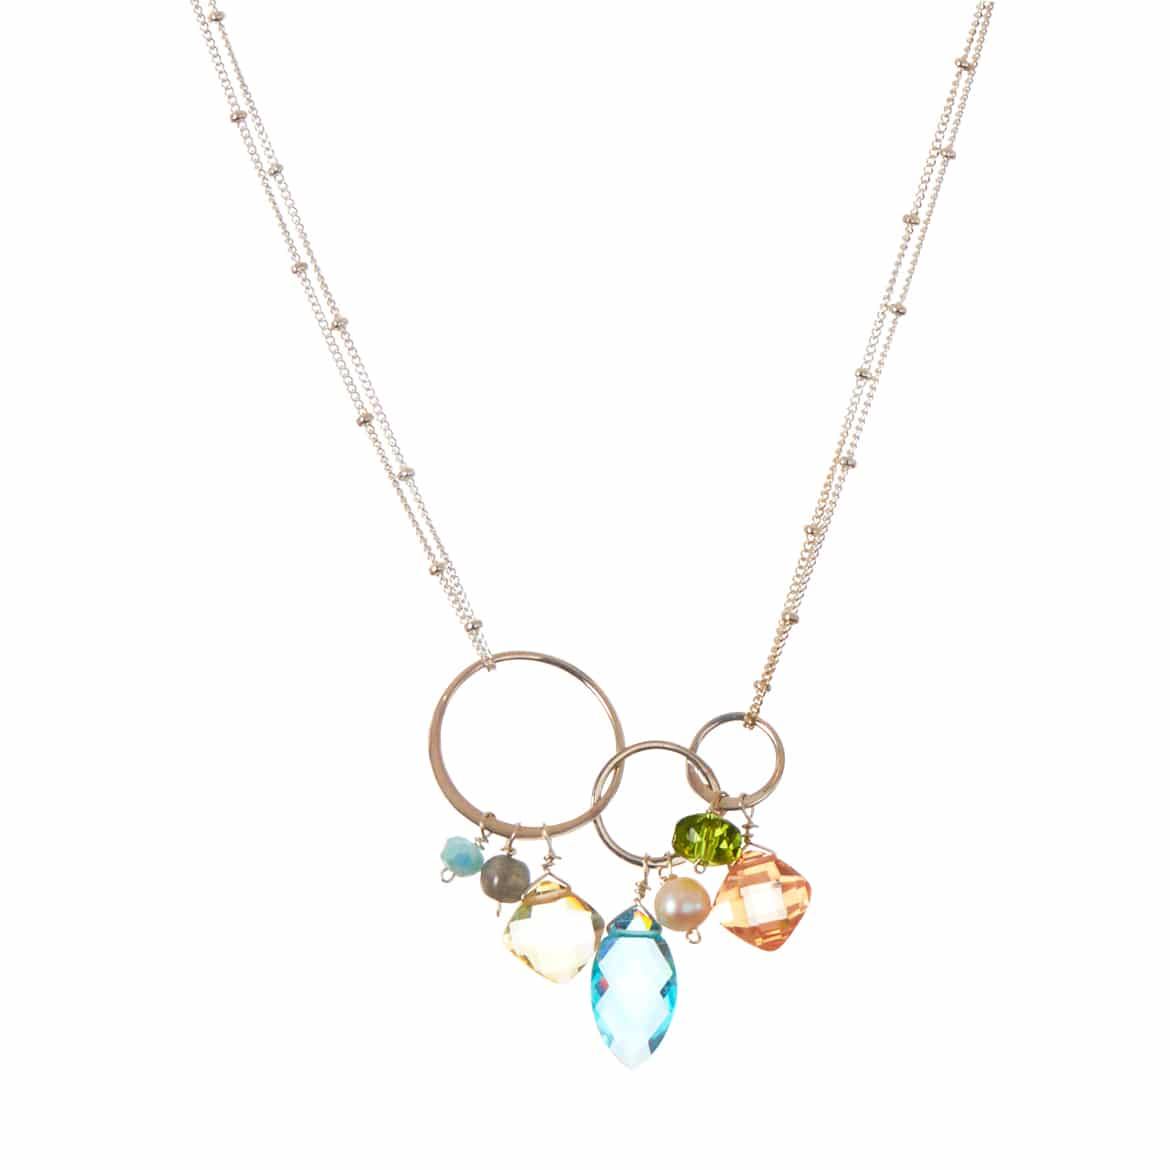 Joy Link Necklace with Marquee Center | Anna Balkan